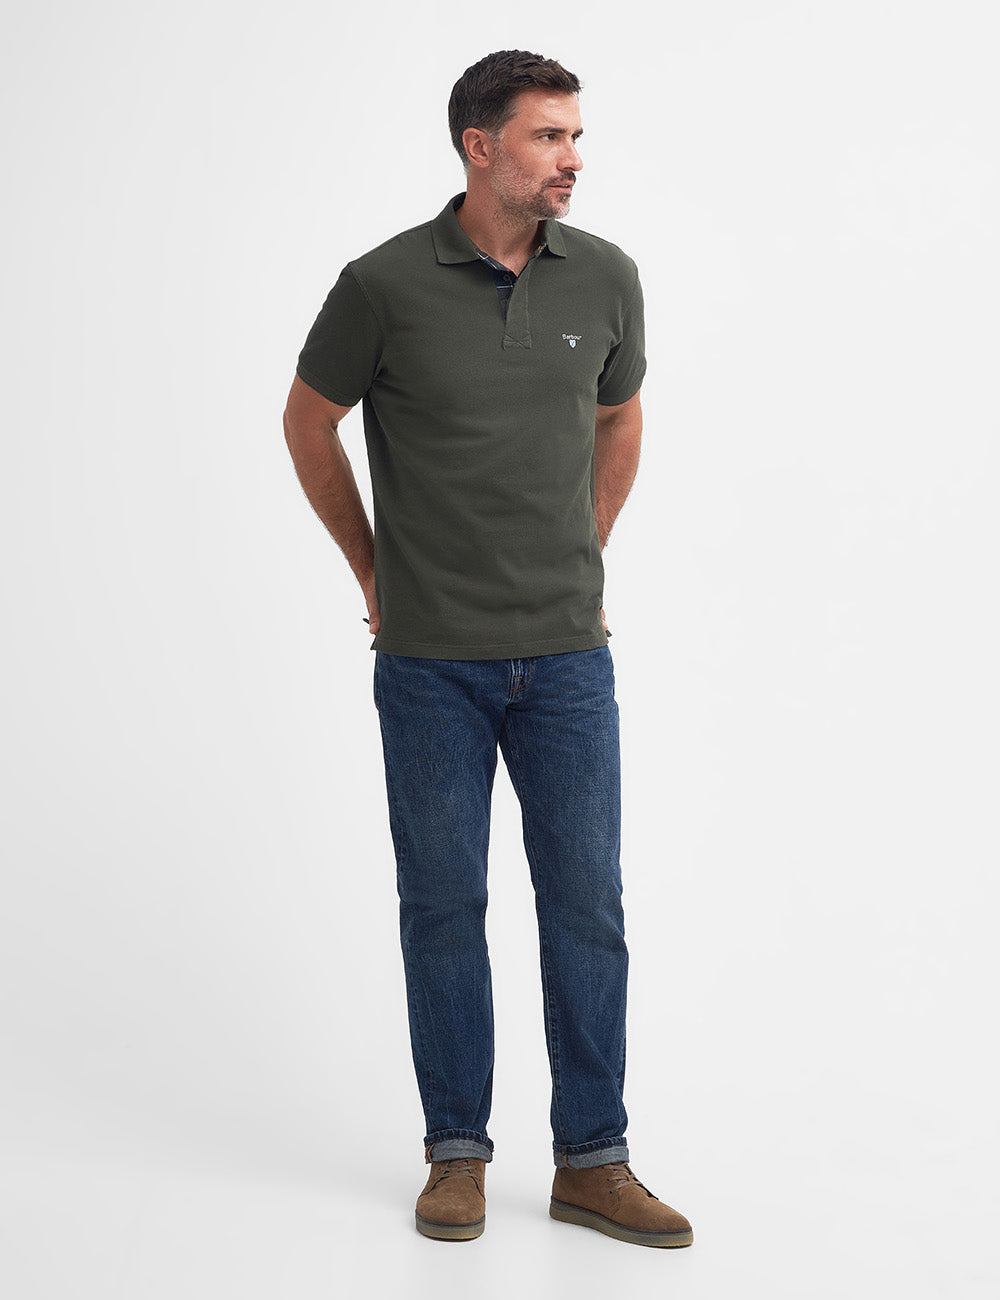 Barbour Hart Polo Shirt - Dark Olive